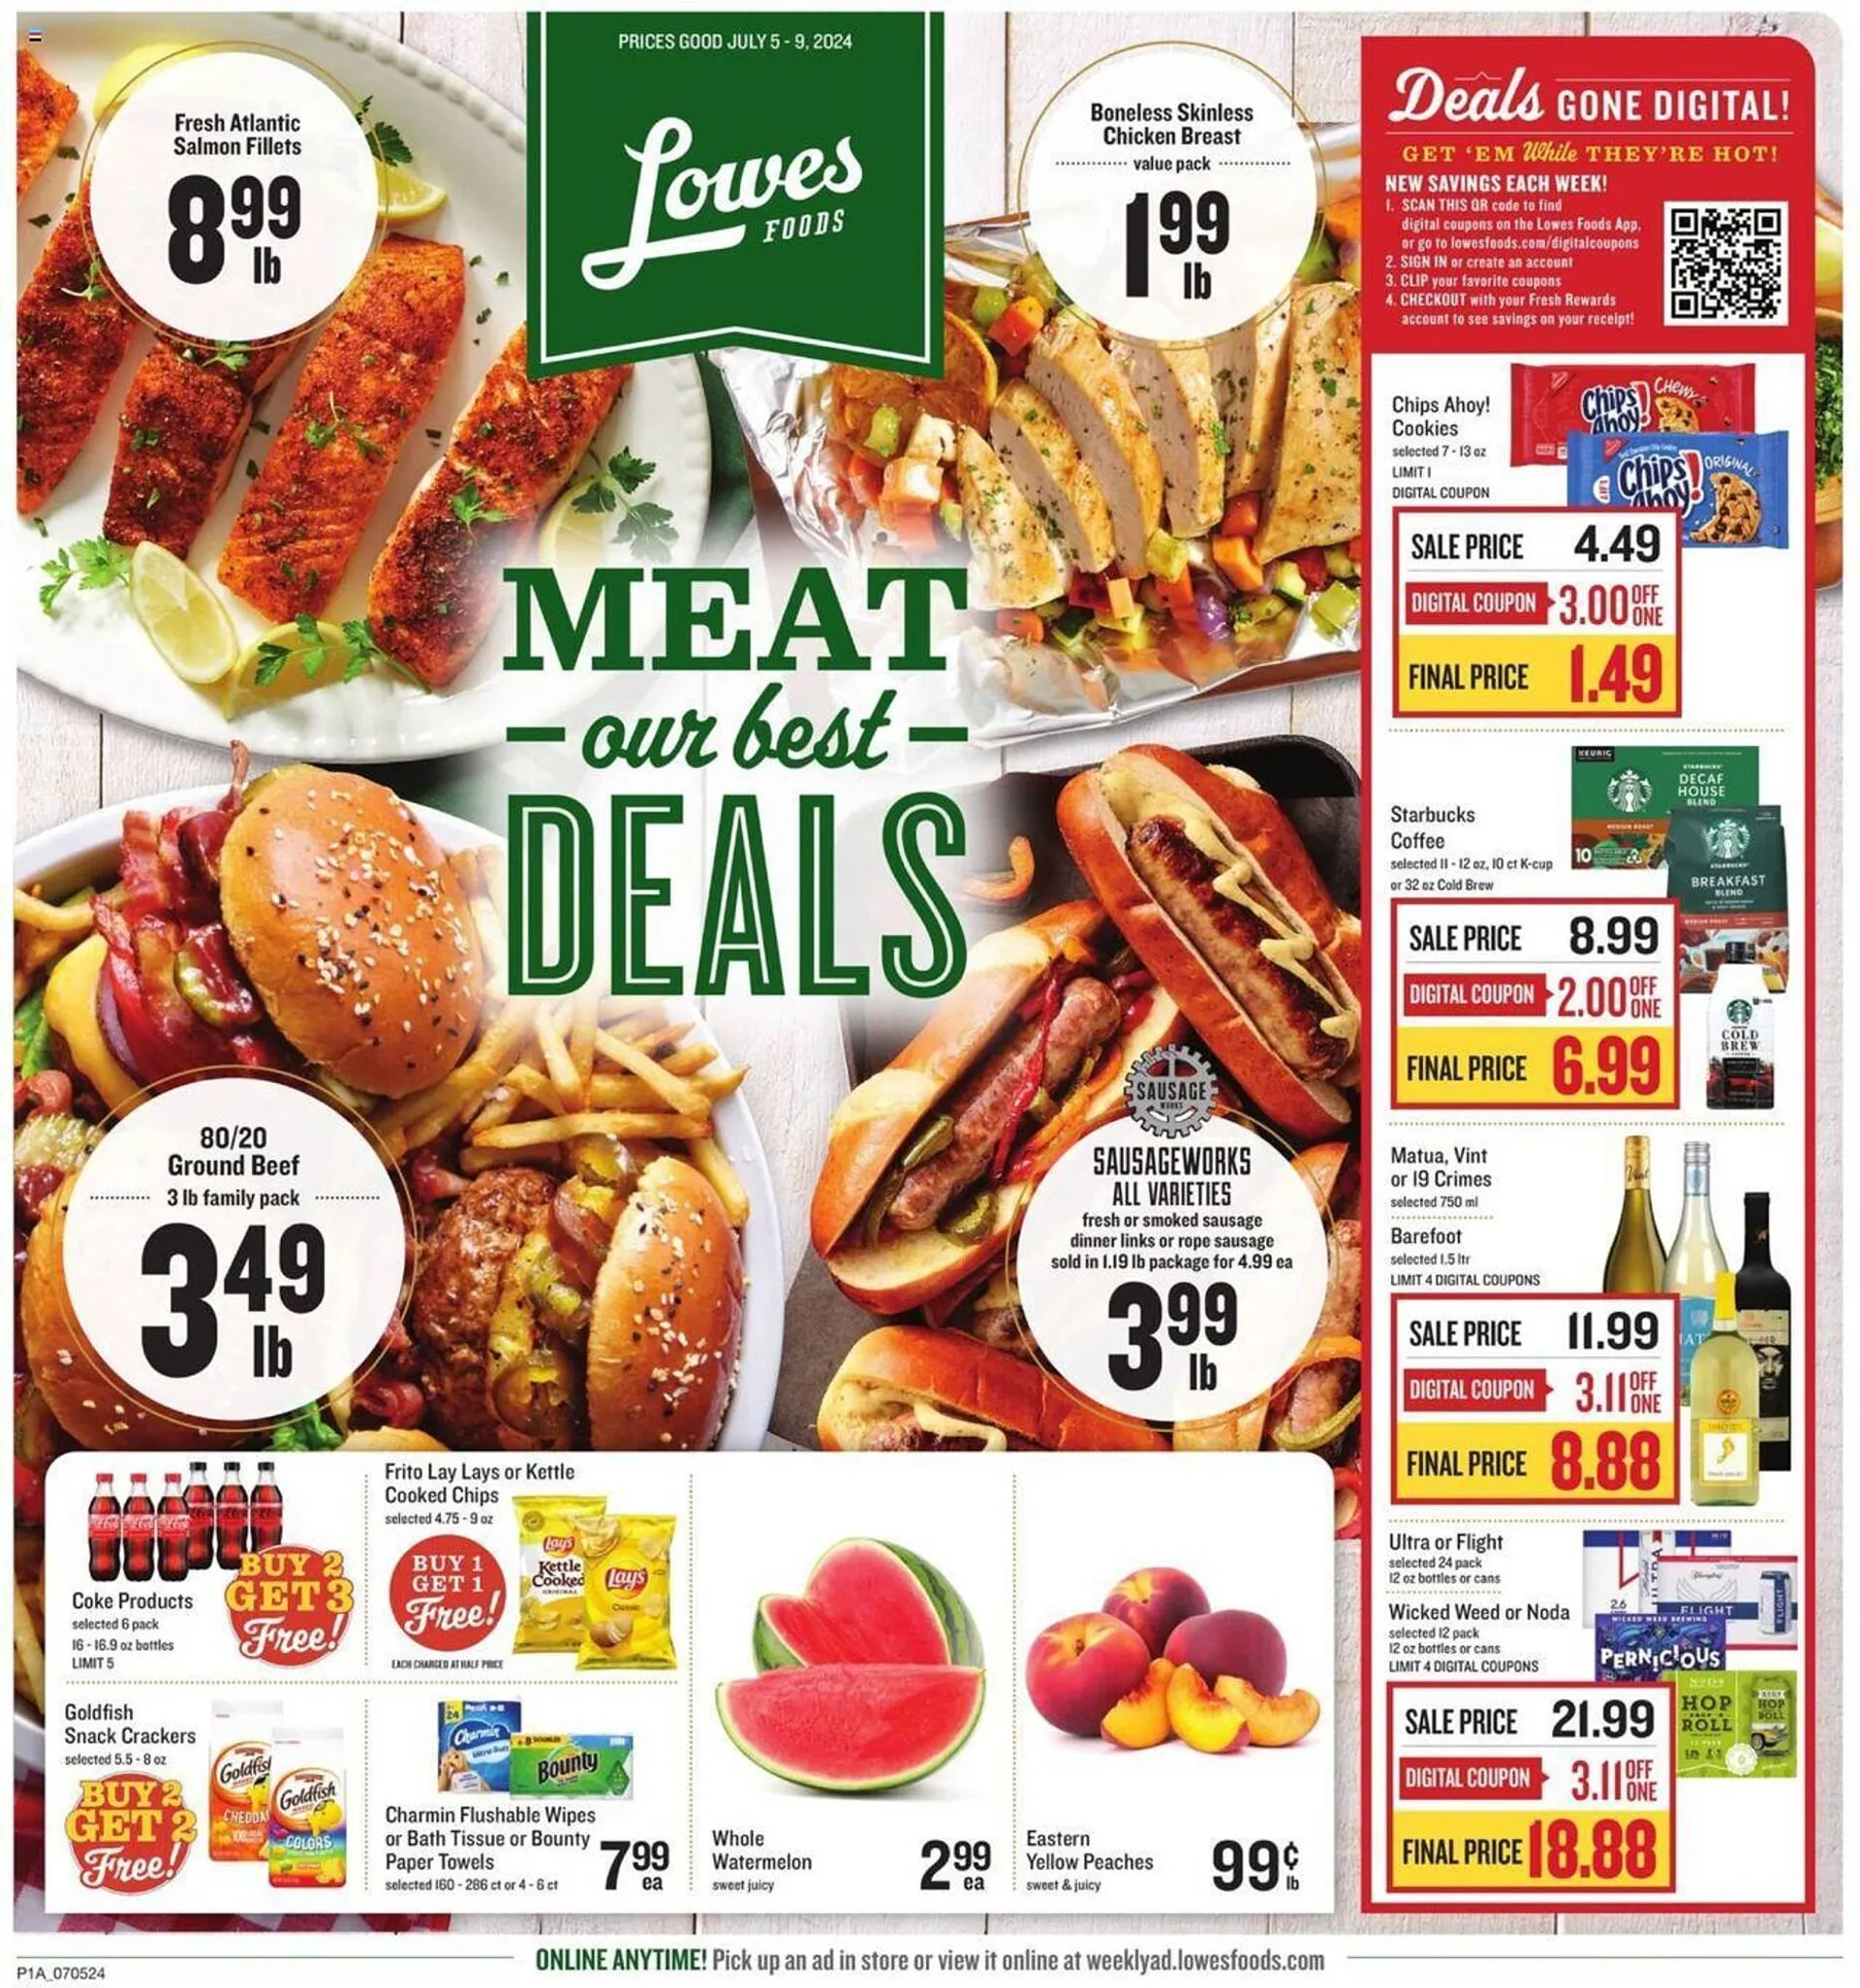 Lowes Foods Weekly Ad - 1